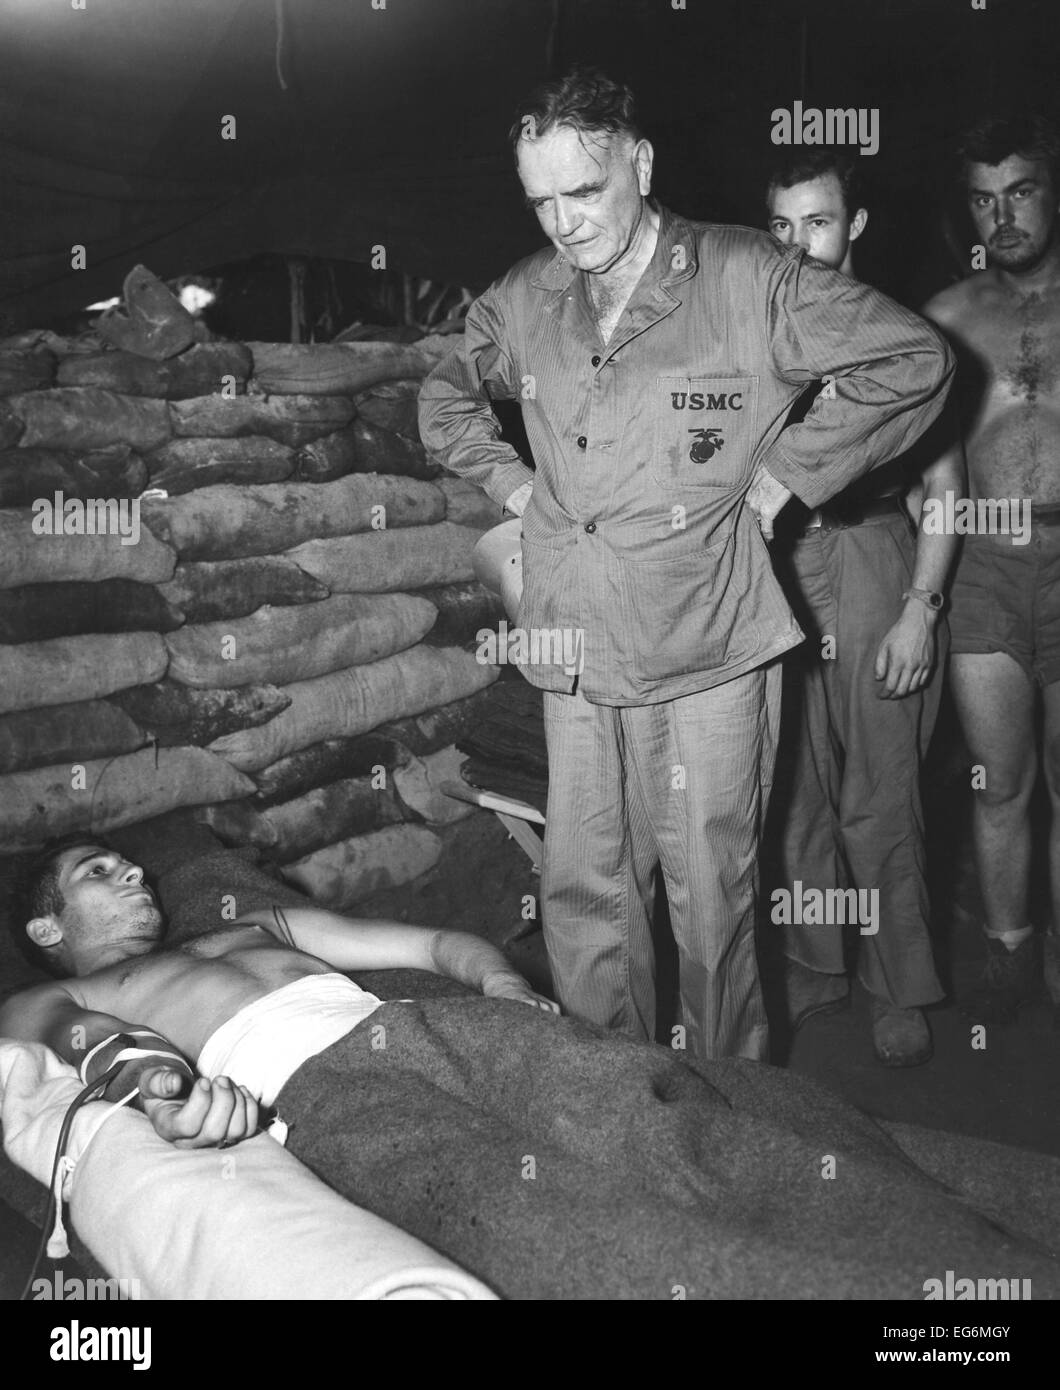 Admiral William Halsey visiting a sandbagged hospital dugout at Bougainville. The soldier is receiving a saline injection after Stock Photo